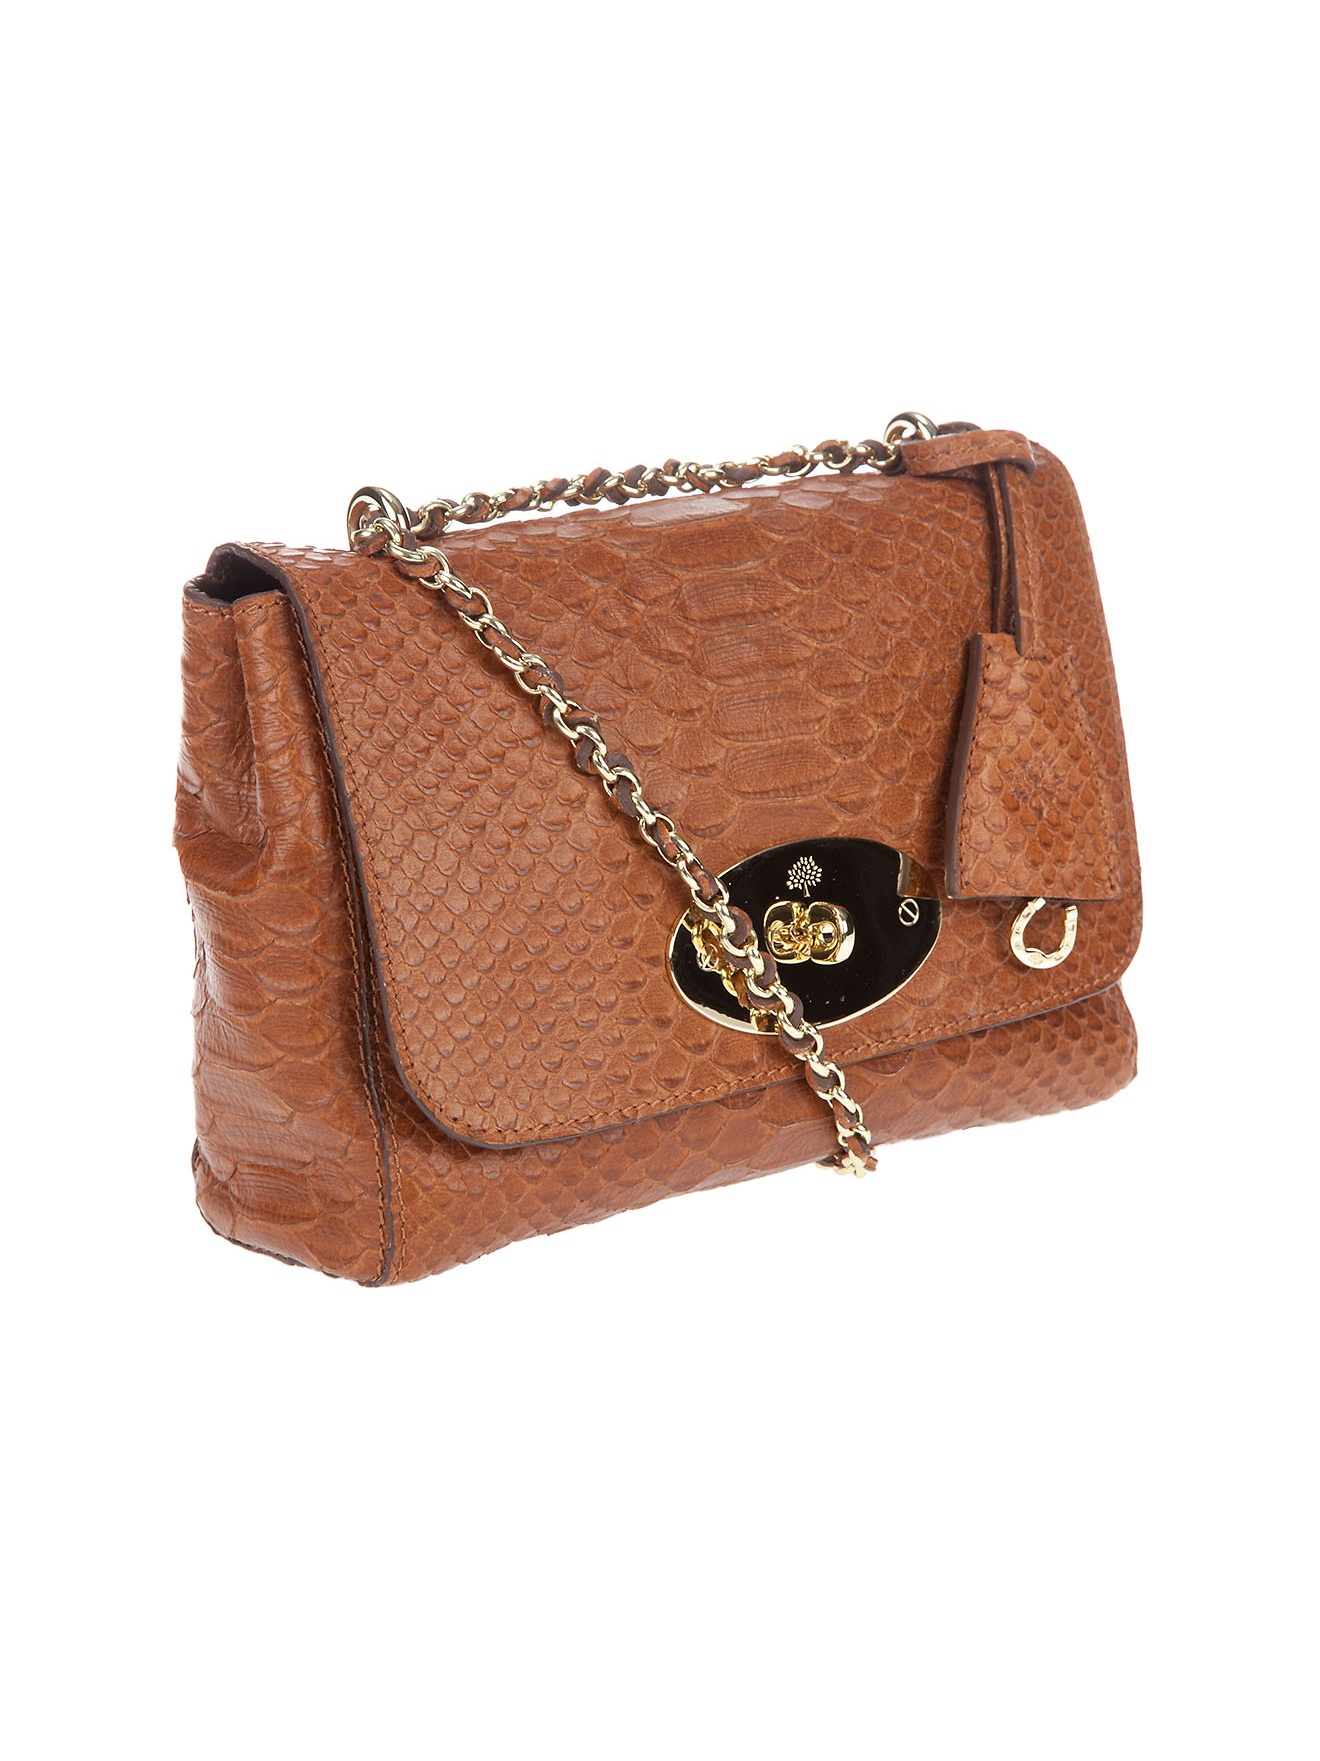  Mulberry  Lily Bag  in Brown Lyst